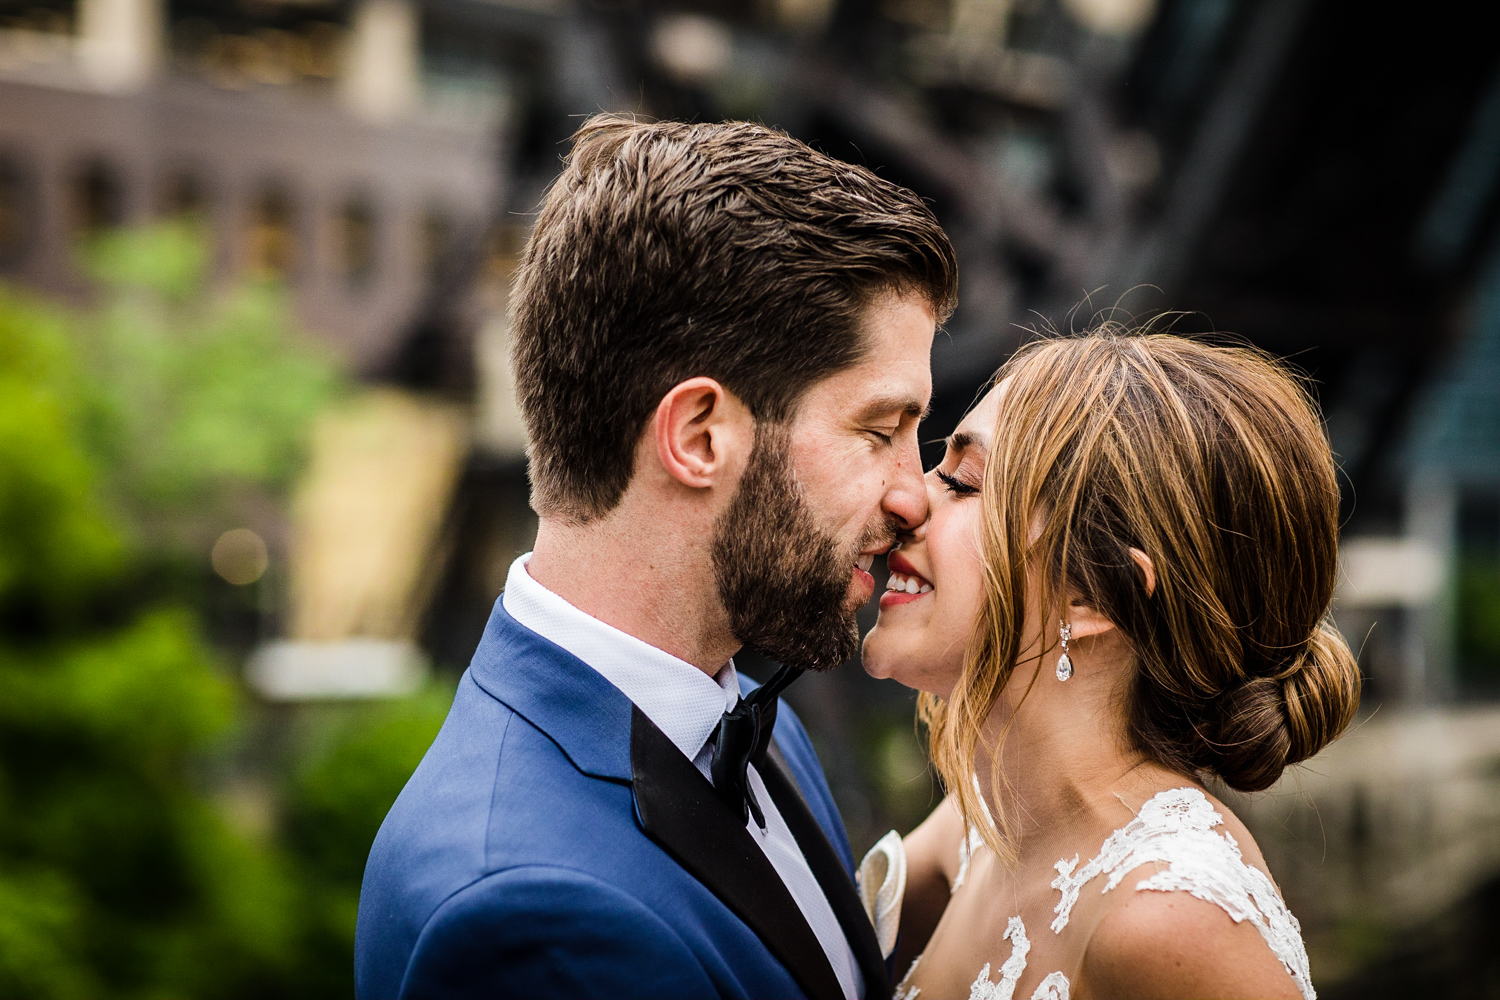 A bride and groom share a kiss before their Gallery Marchetti wedding.